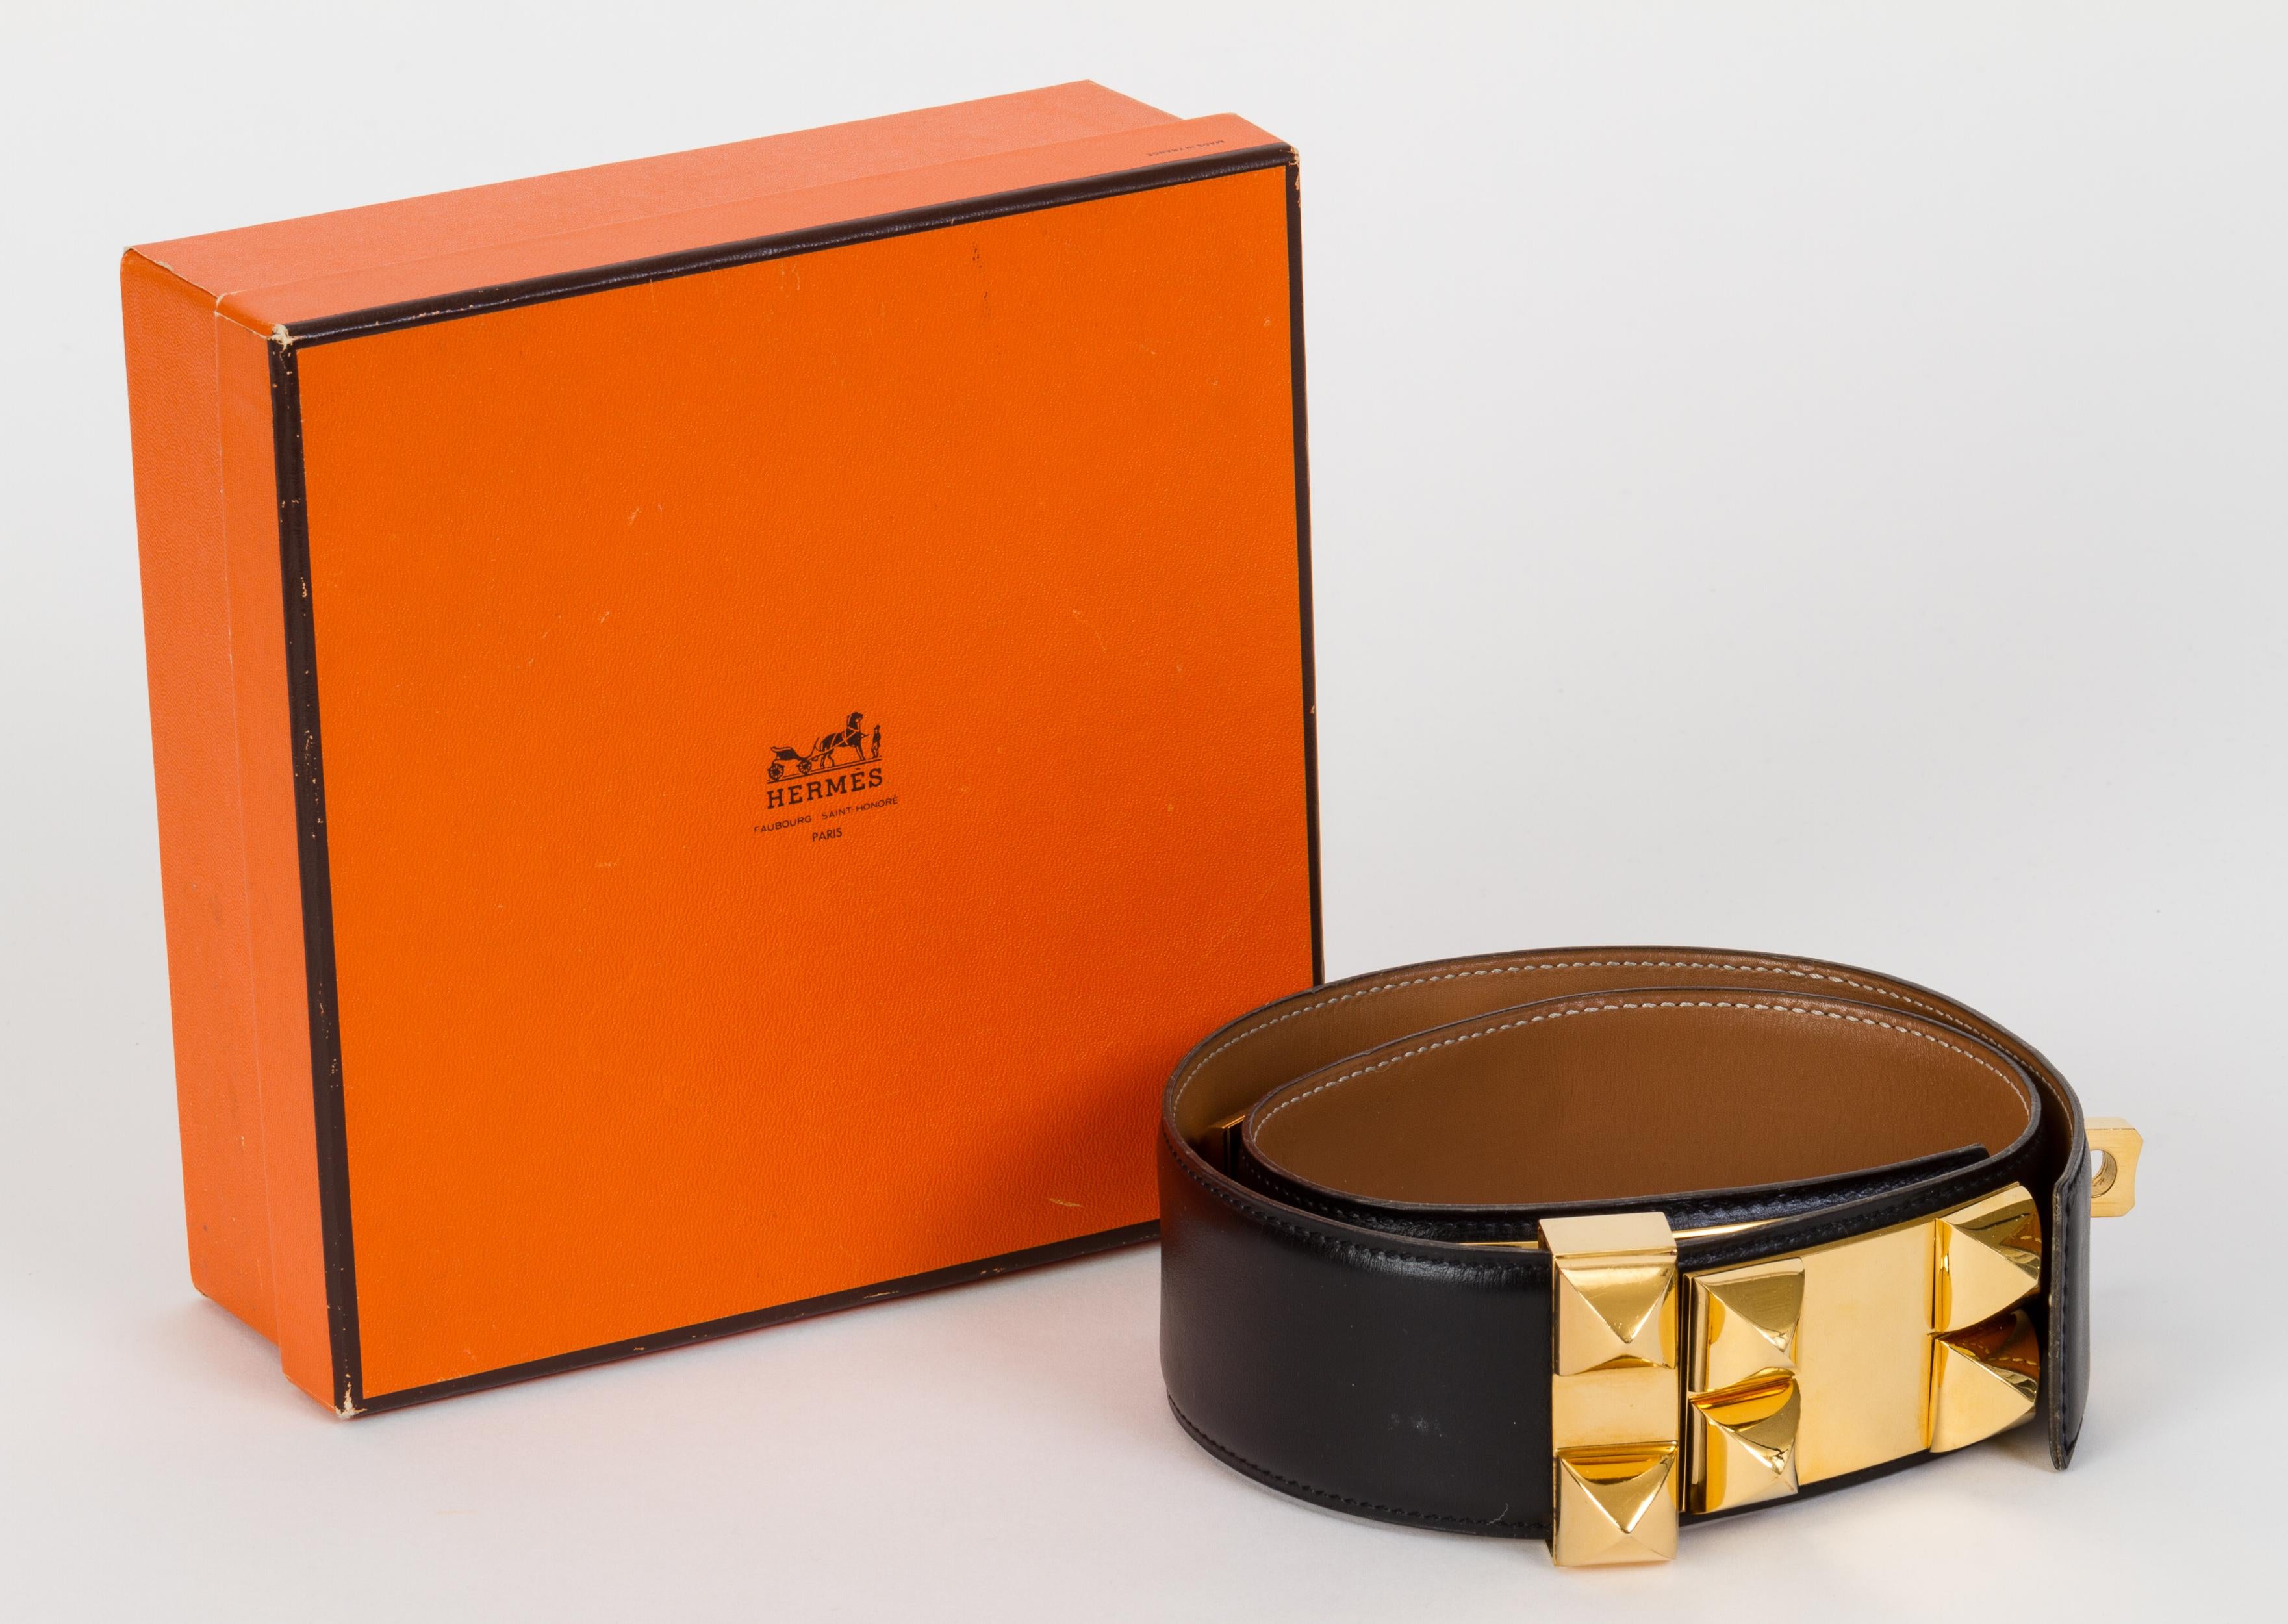 Hermès iconic Collier de Chien belt. Black box calf leather and gold-plated rhodium metal. Size 65 cm. Dated 